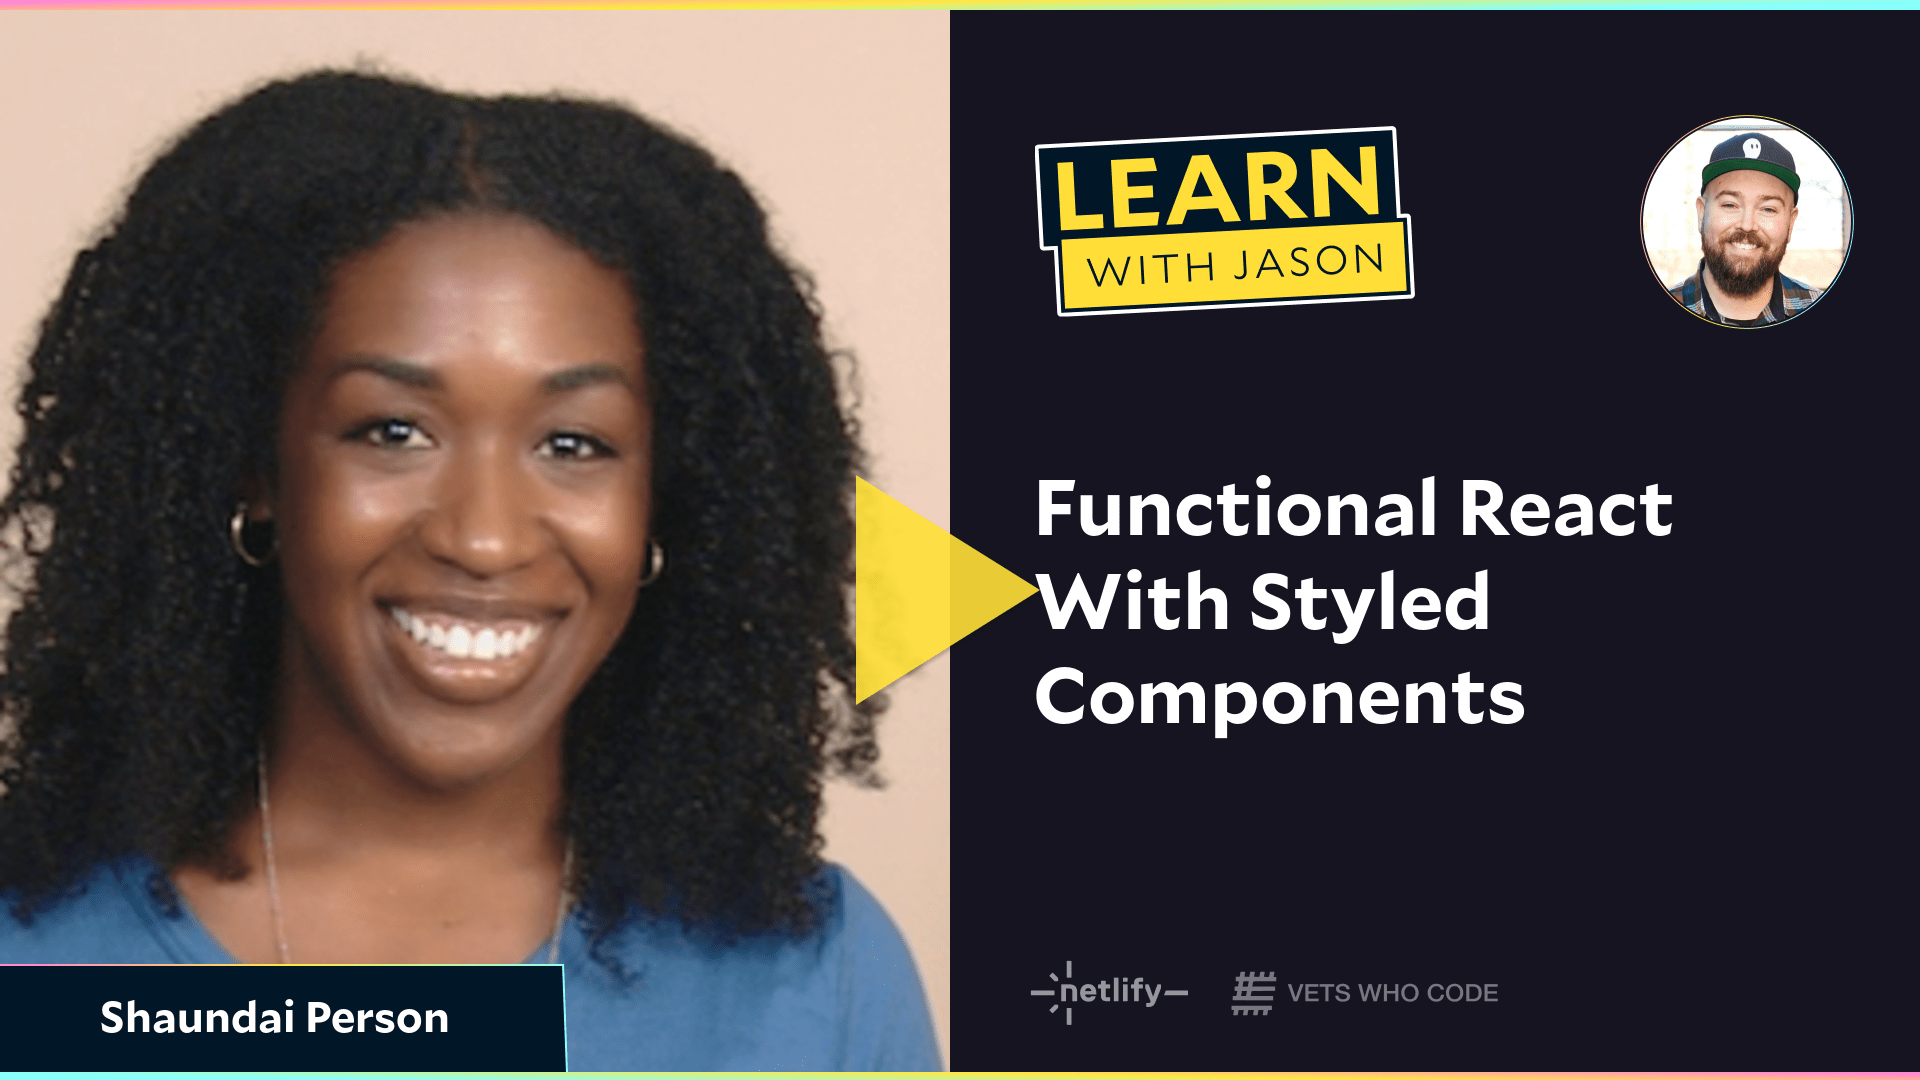 Functional React With Styled Components (with Shaundai Person)